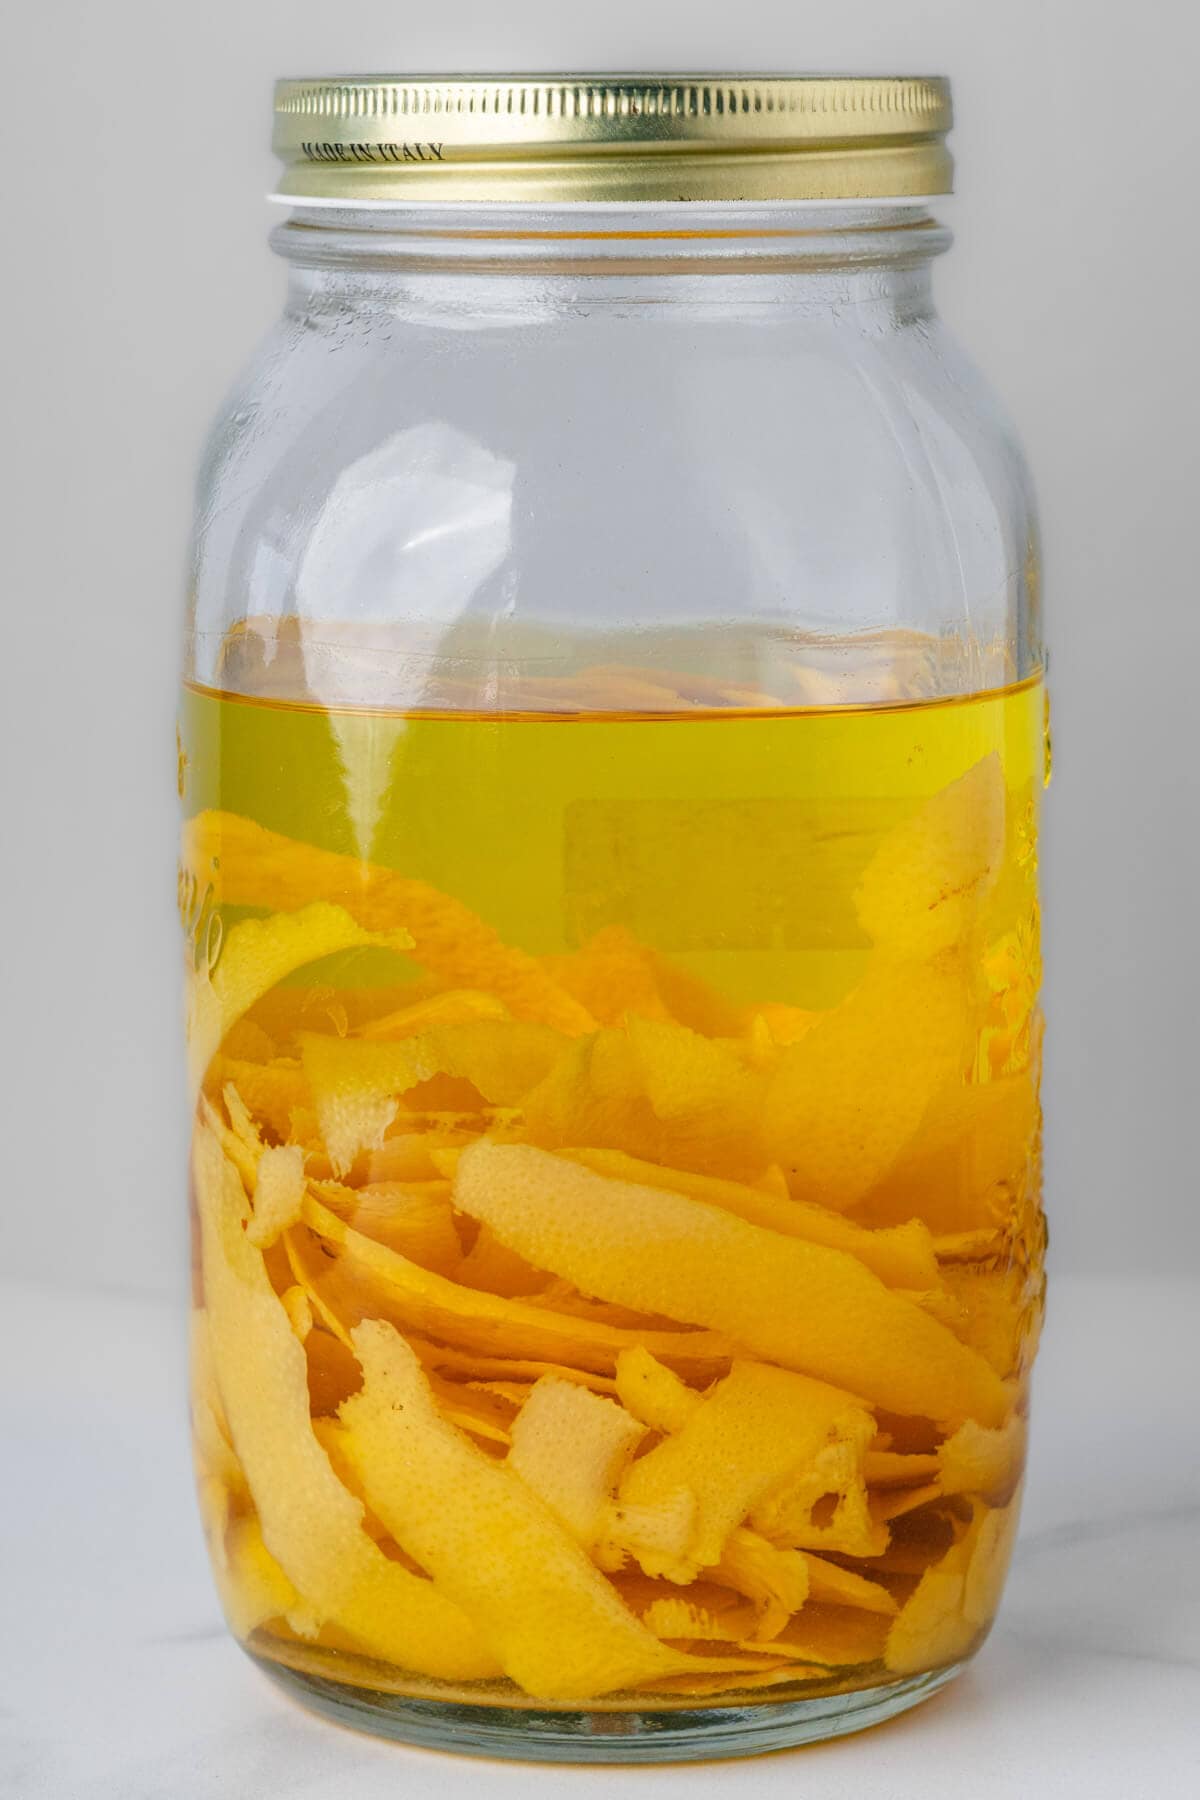 Large jar of lemon rinds with alcohol after 25 days resting